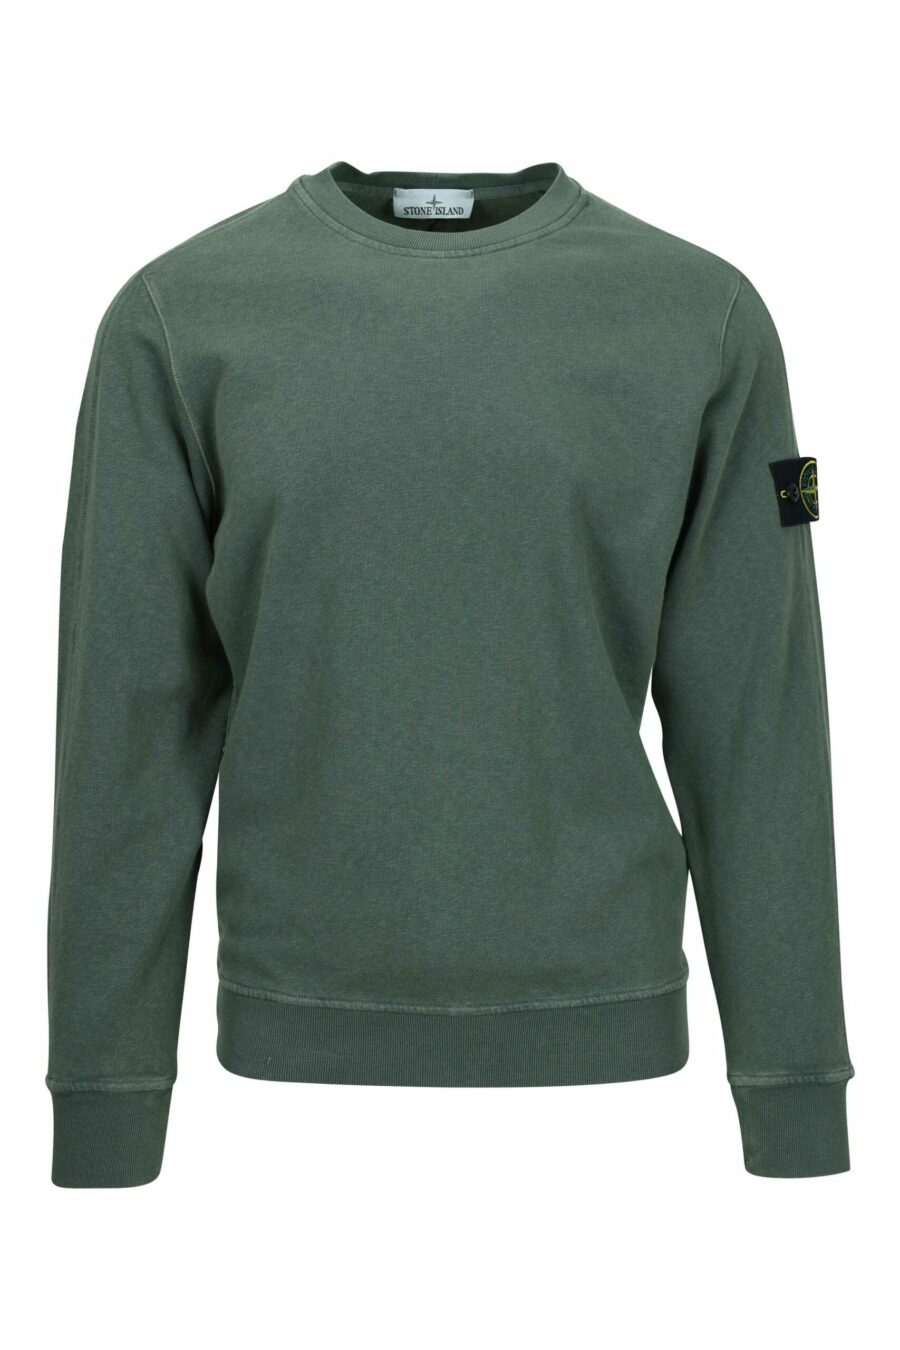 Military green sweatshirt with compass logo patch - 8052572906923 scaled